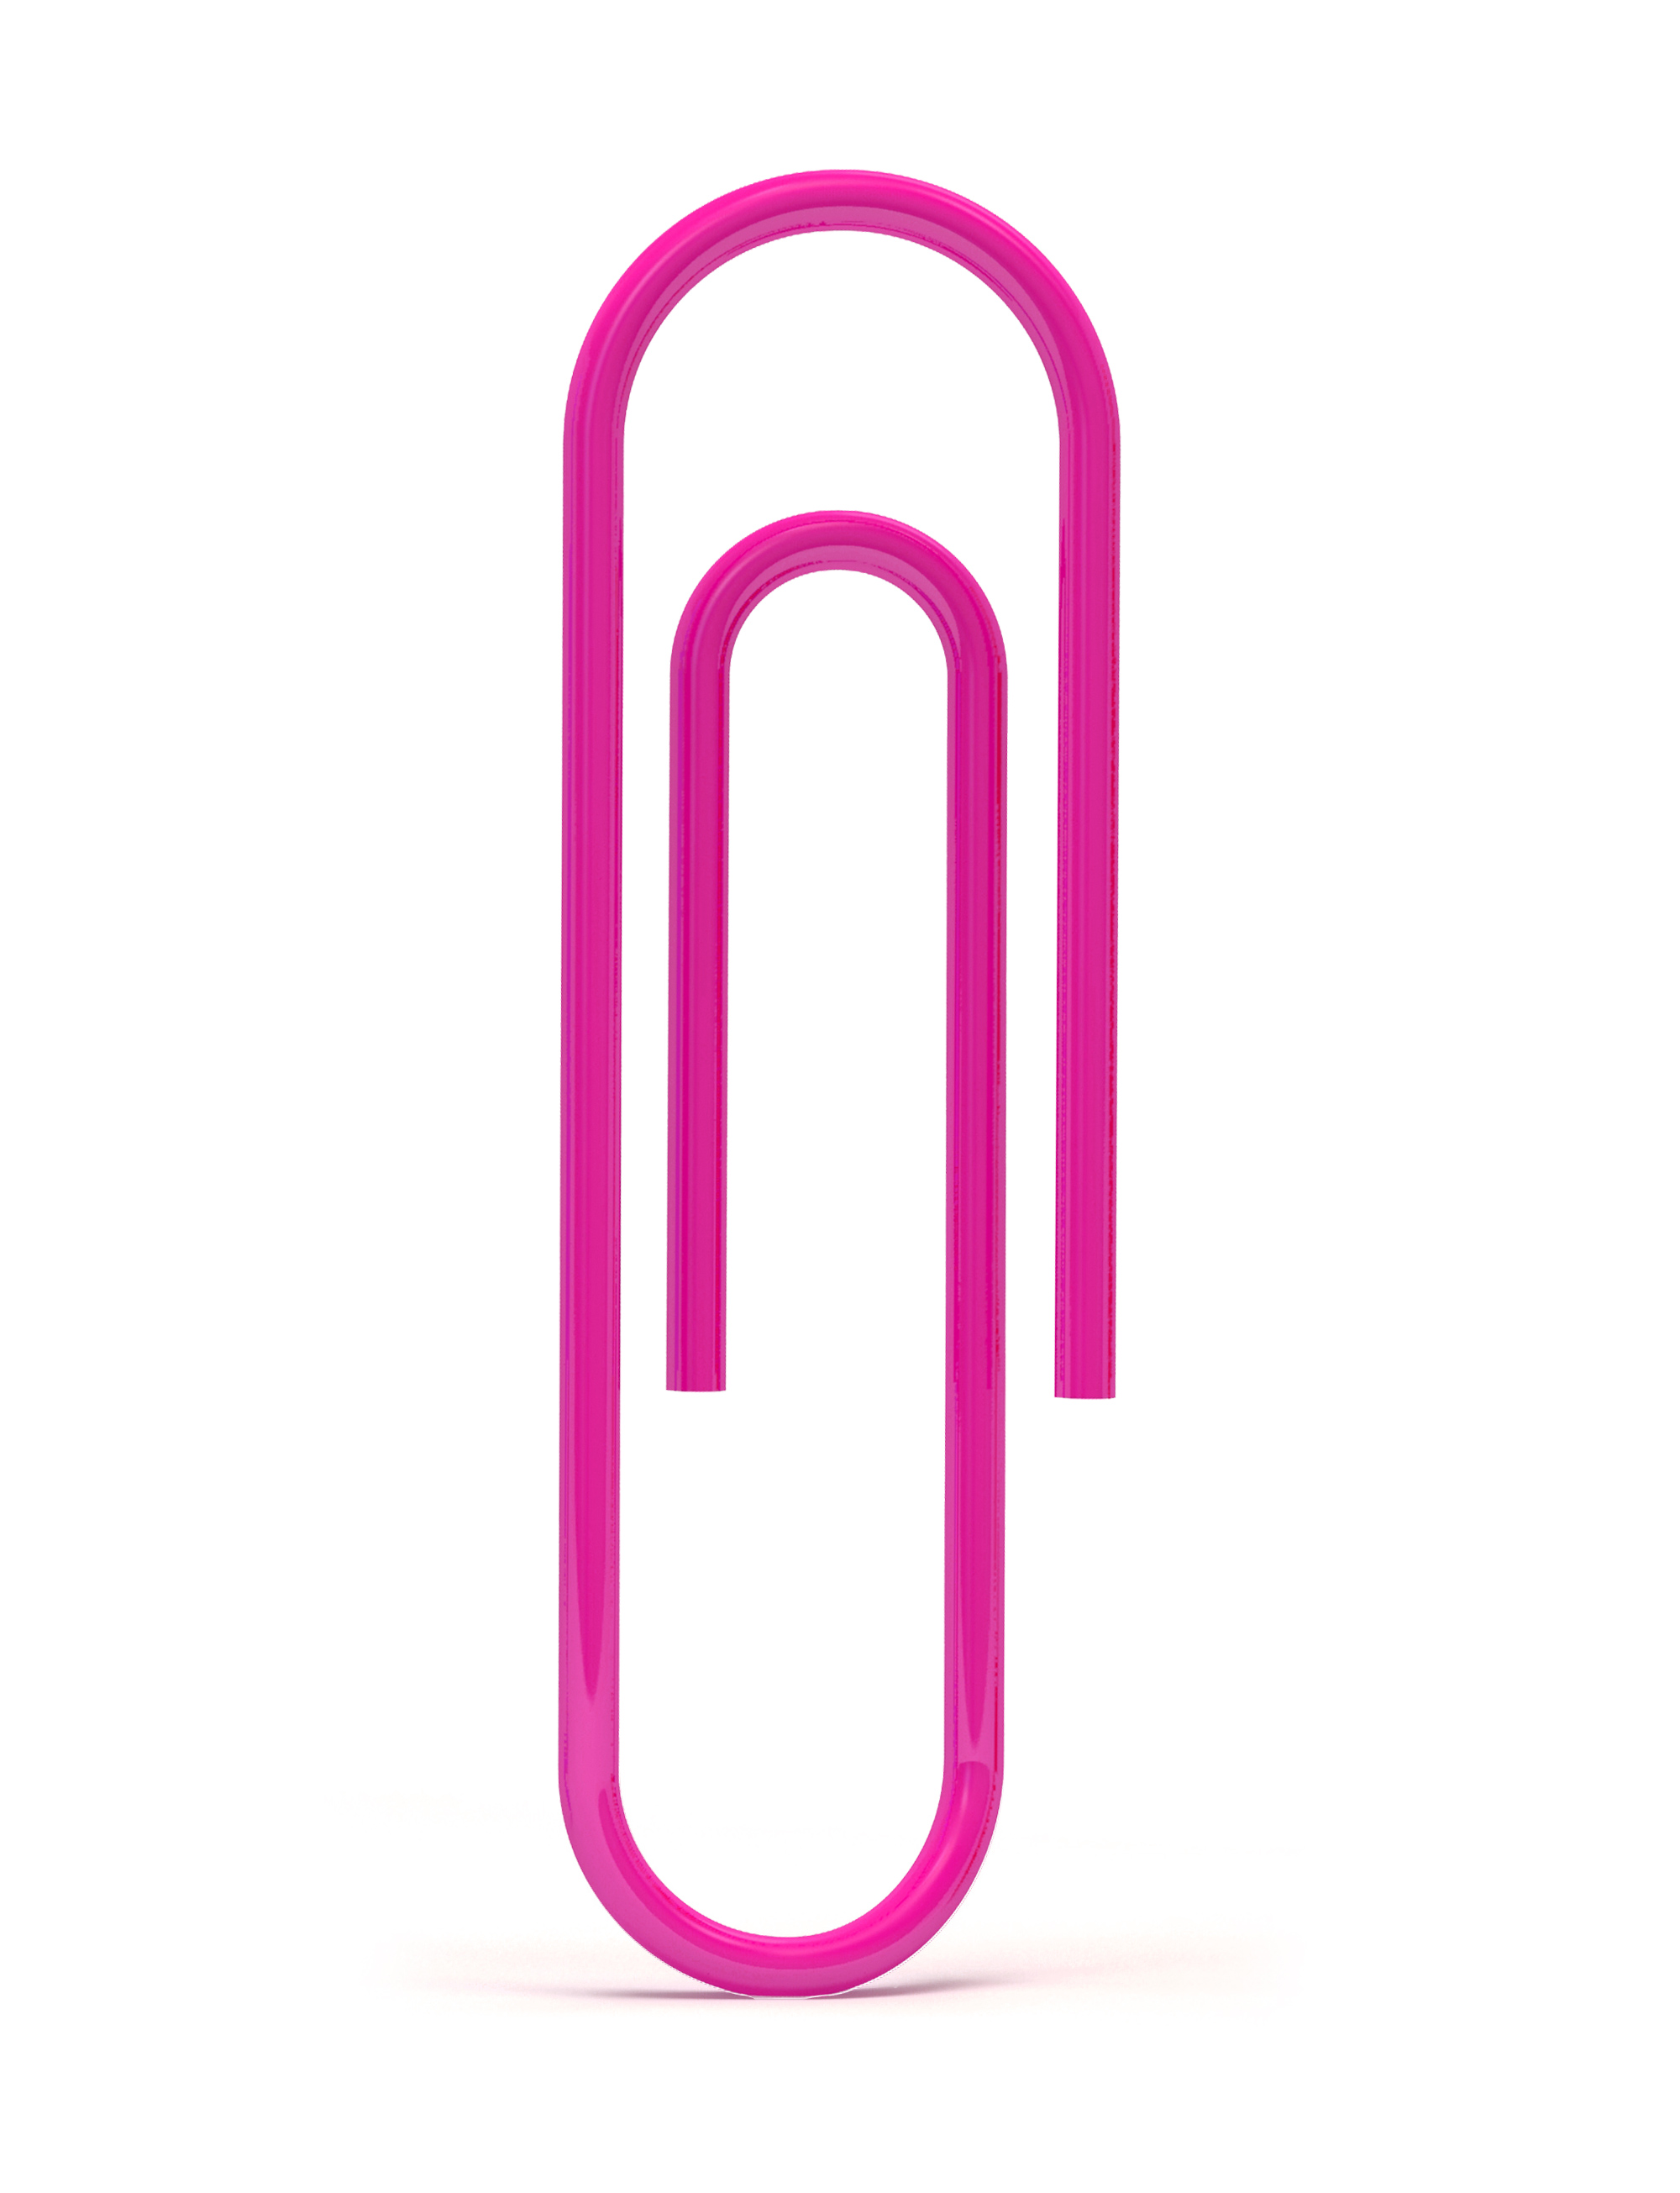 clipart of paper clip - photo #38